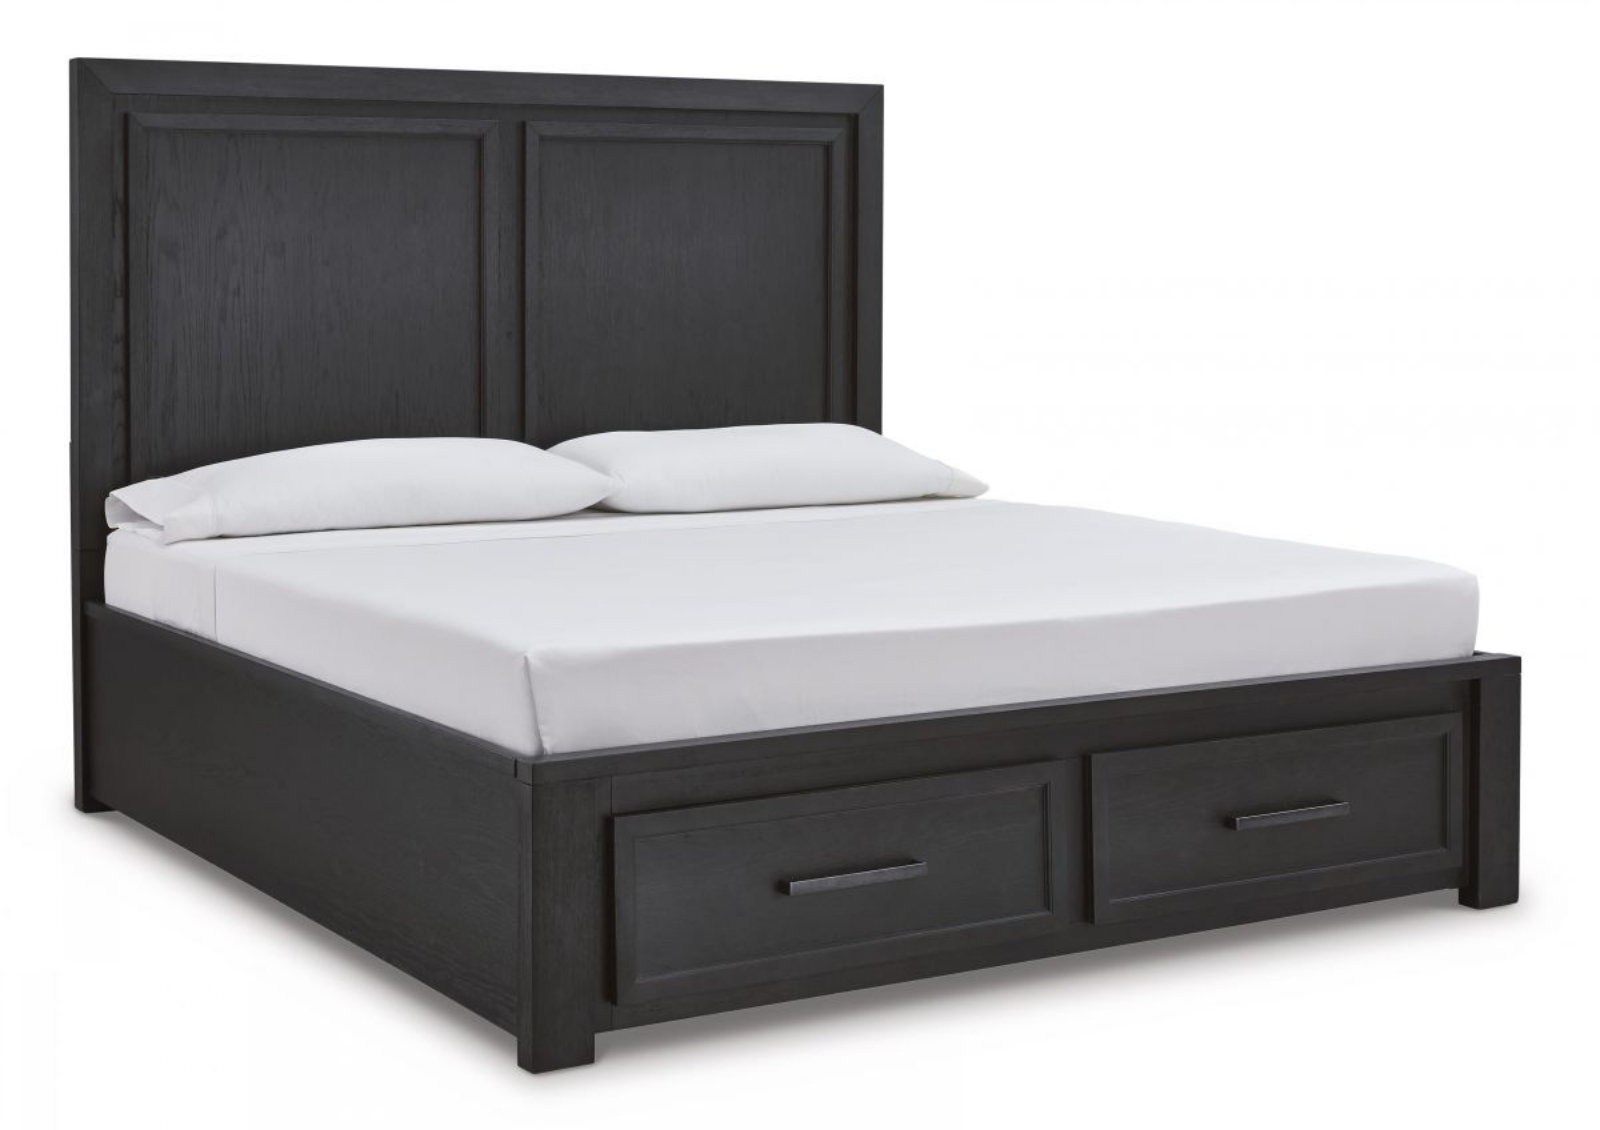 Picture of Foyland King Size Bed